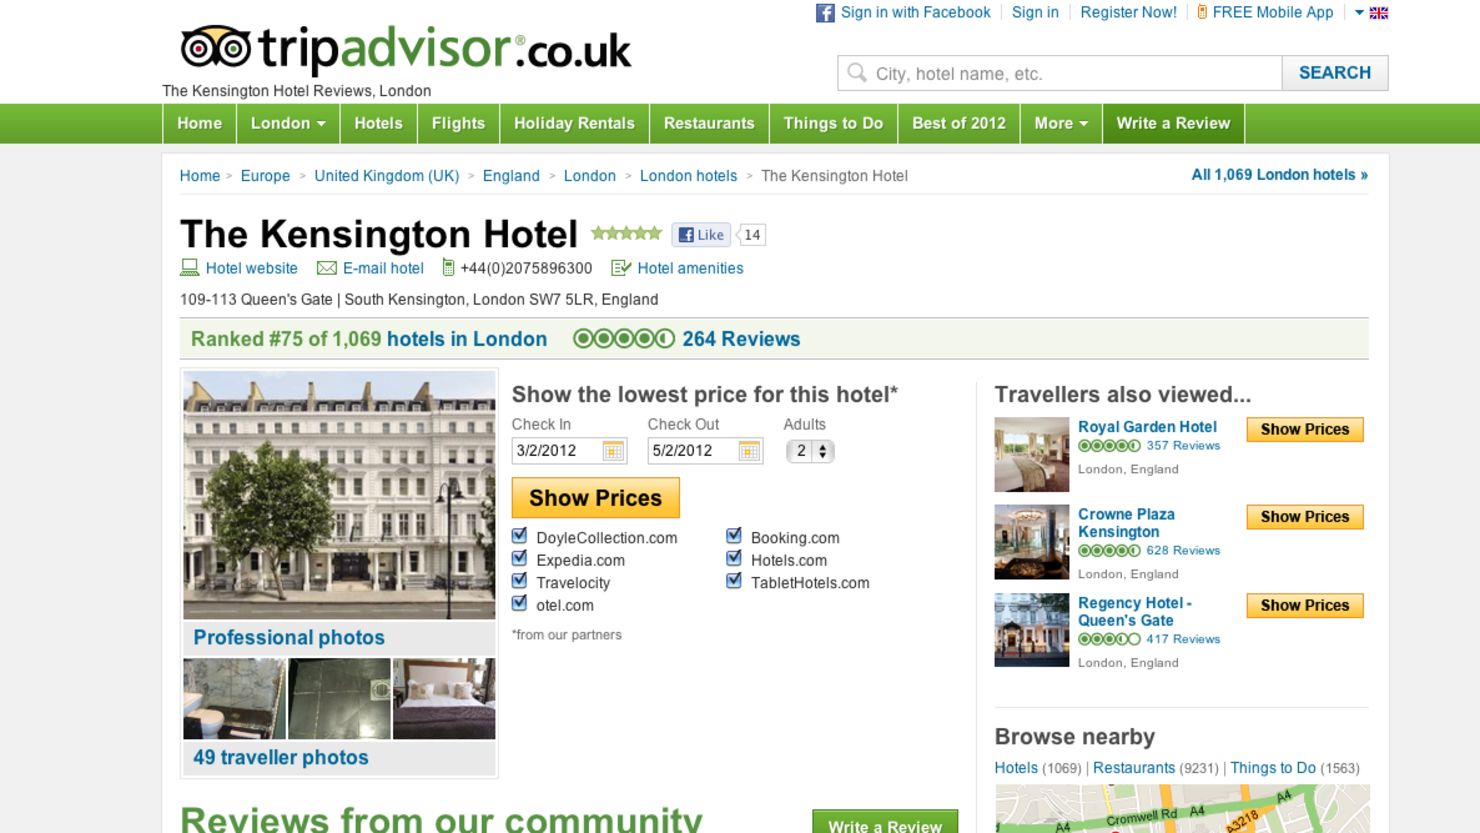 TripAdvisor has changed some of the wording on its UK site in response to a complaint filed with an ad regulator.